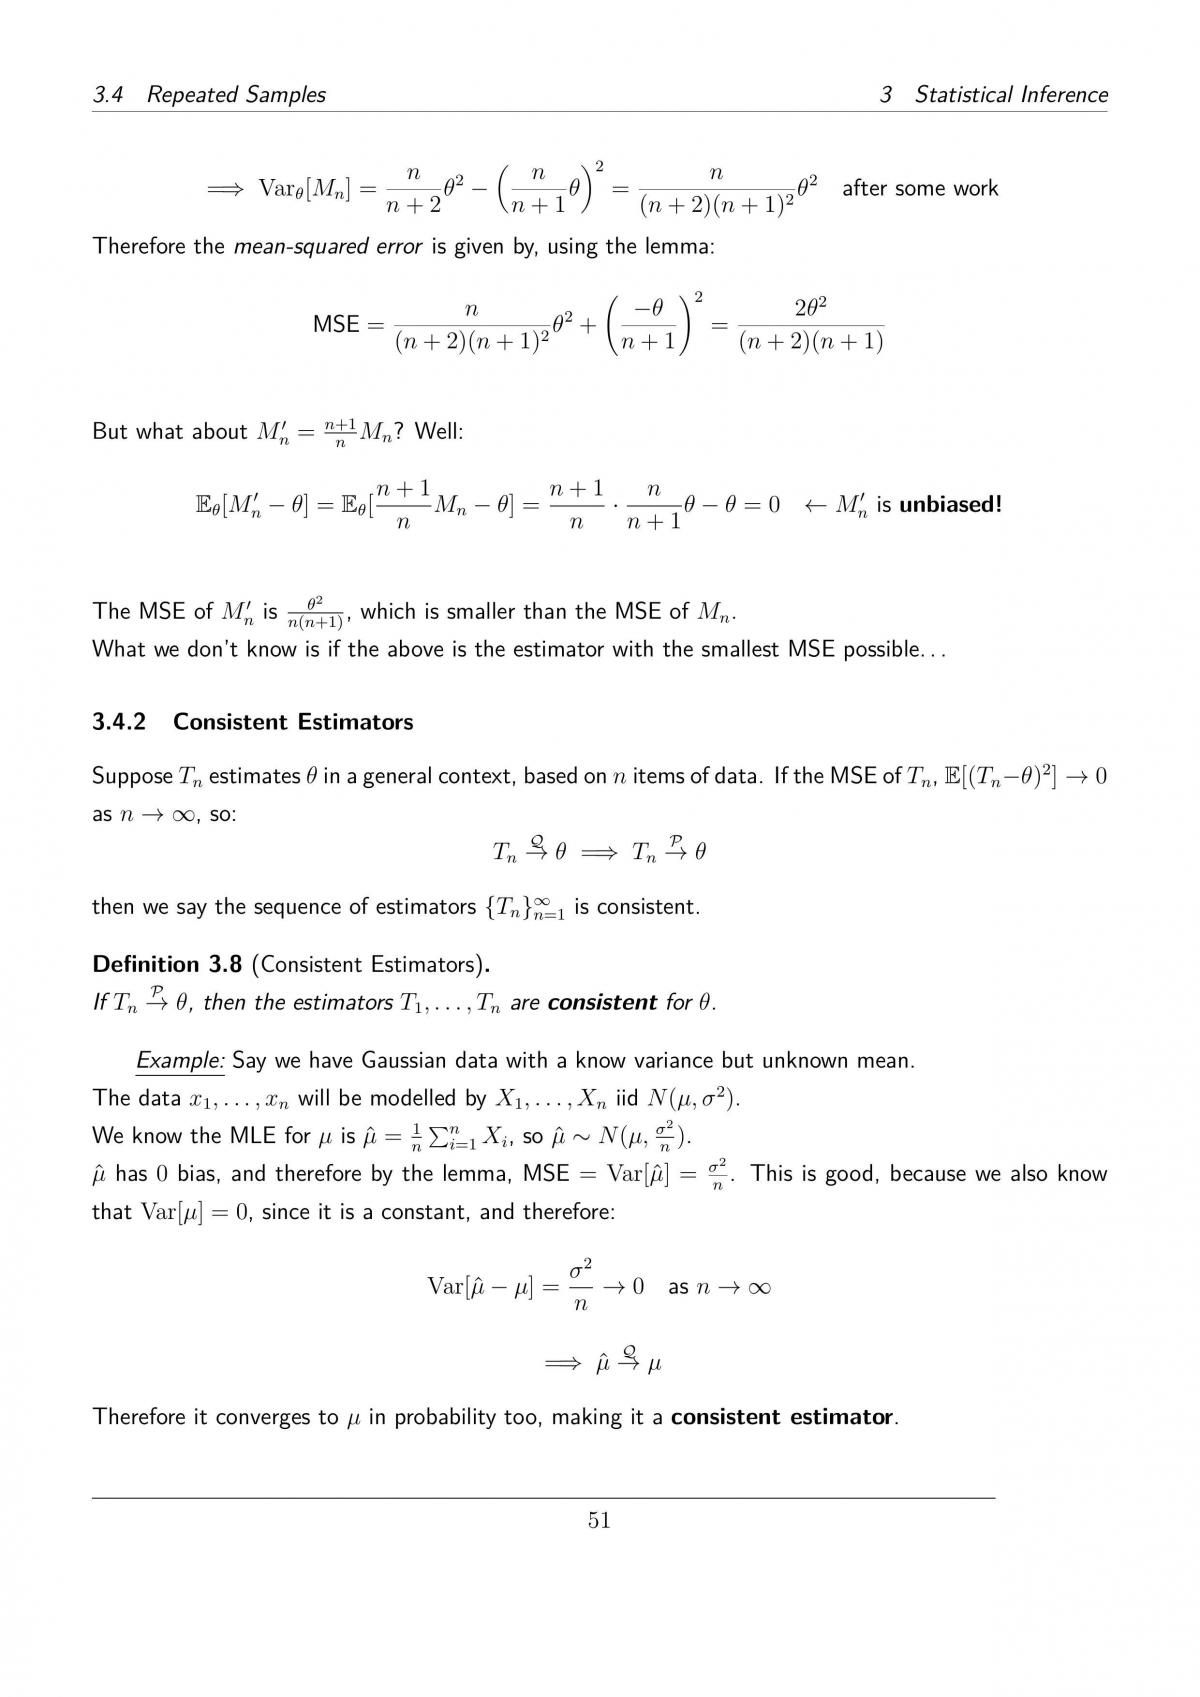 ST220I Introduction to Mathematical Statistics Notes - Page 53